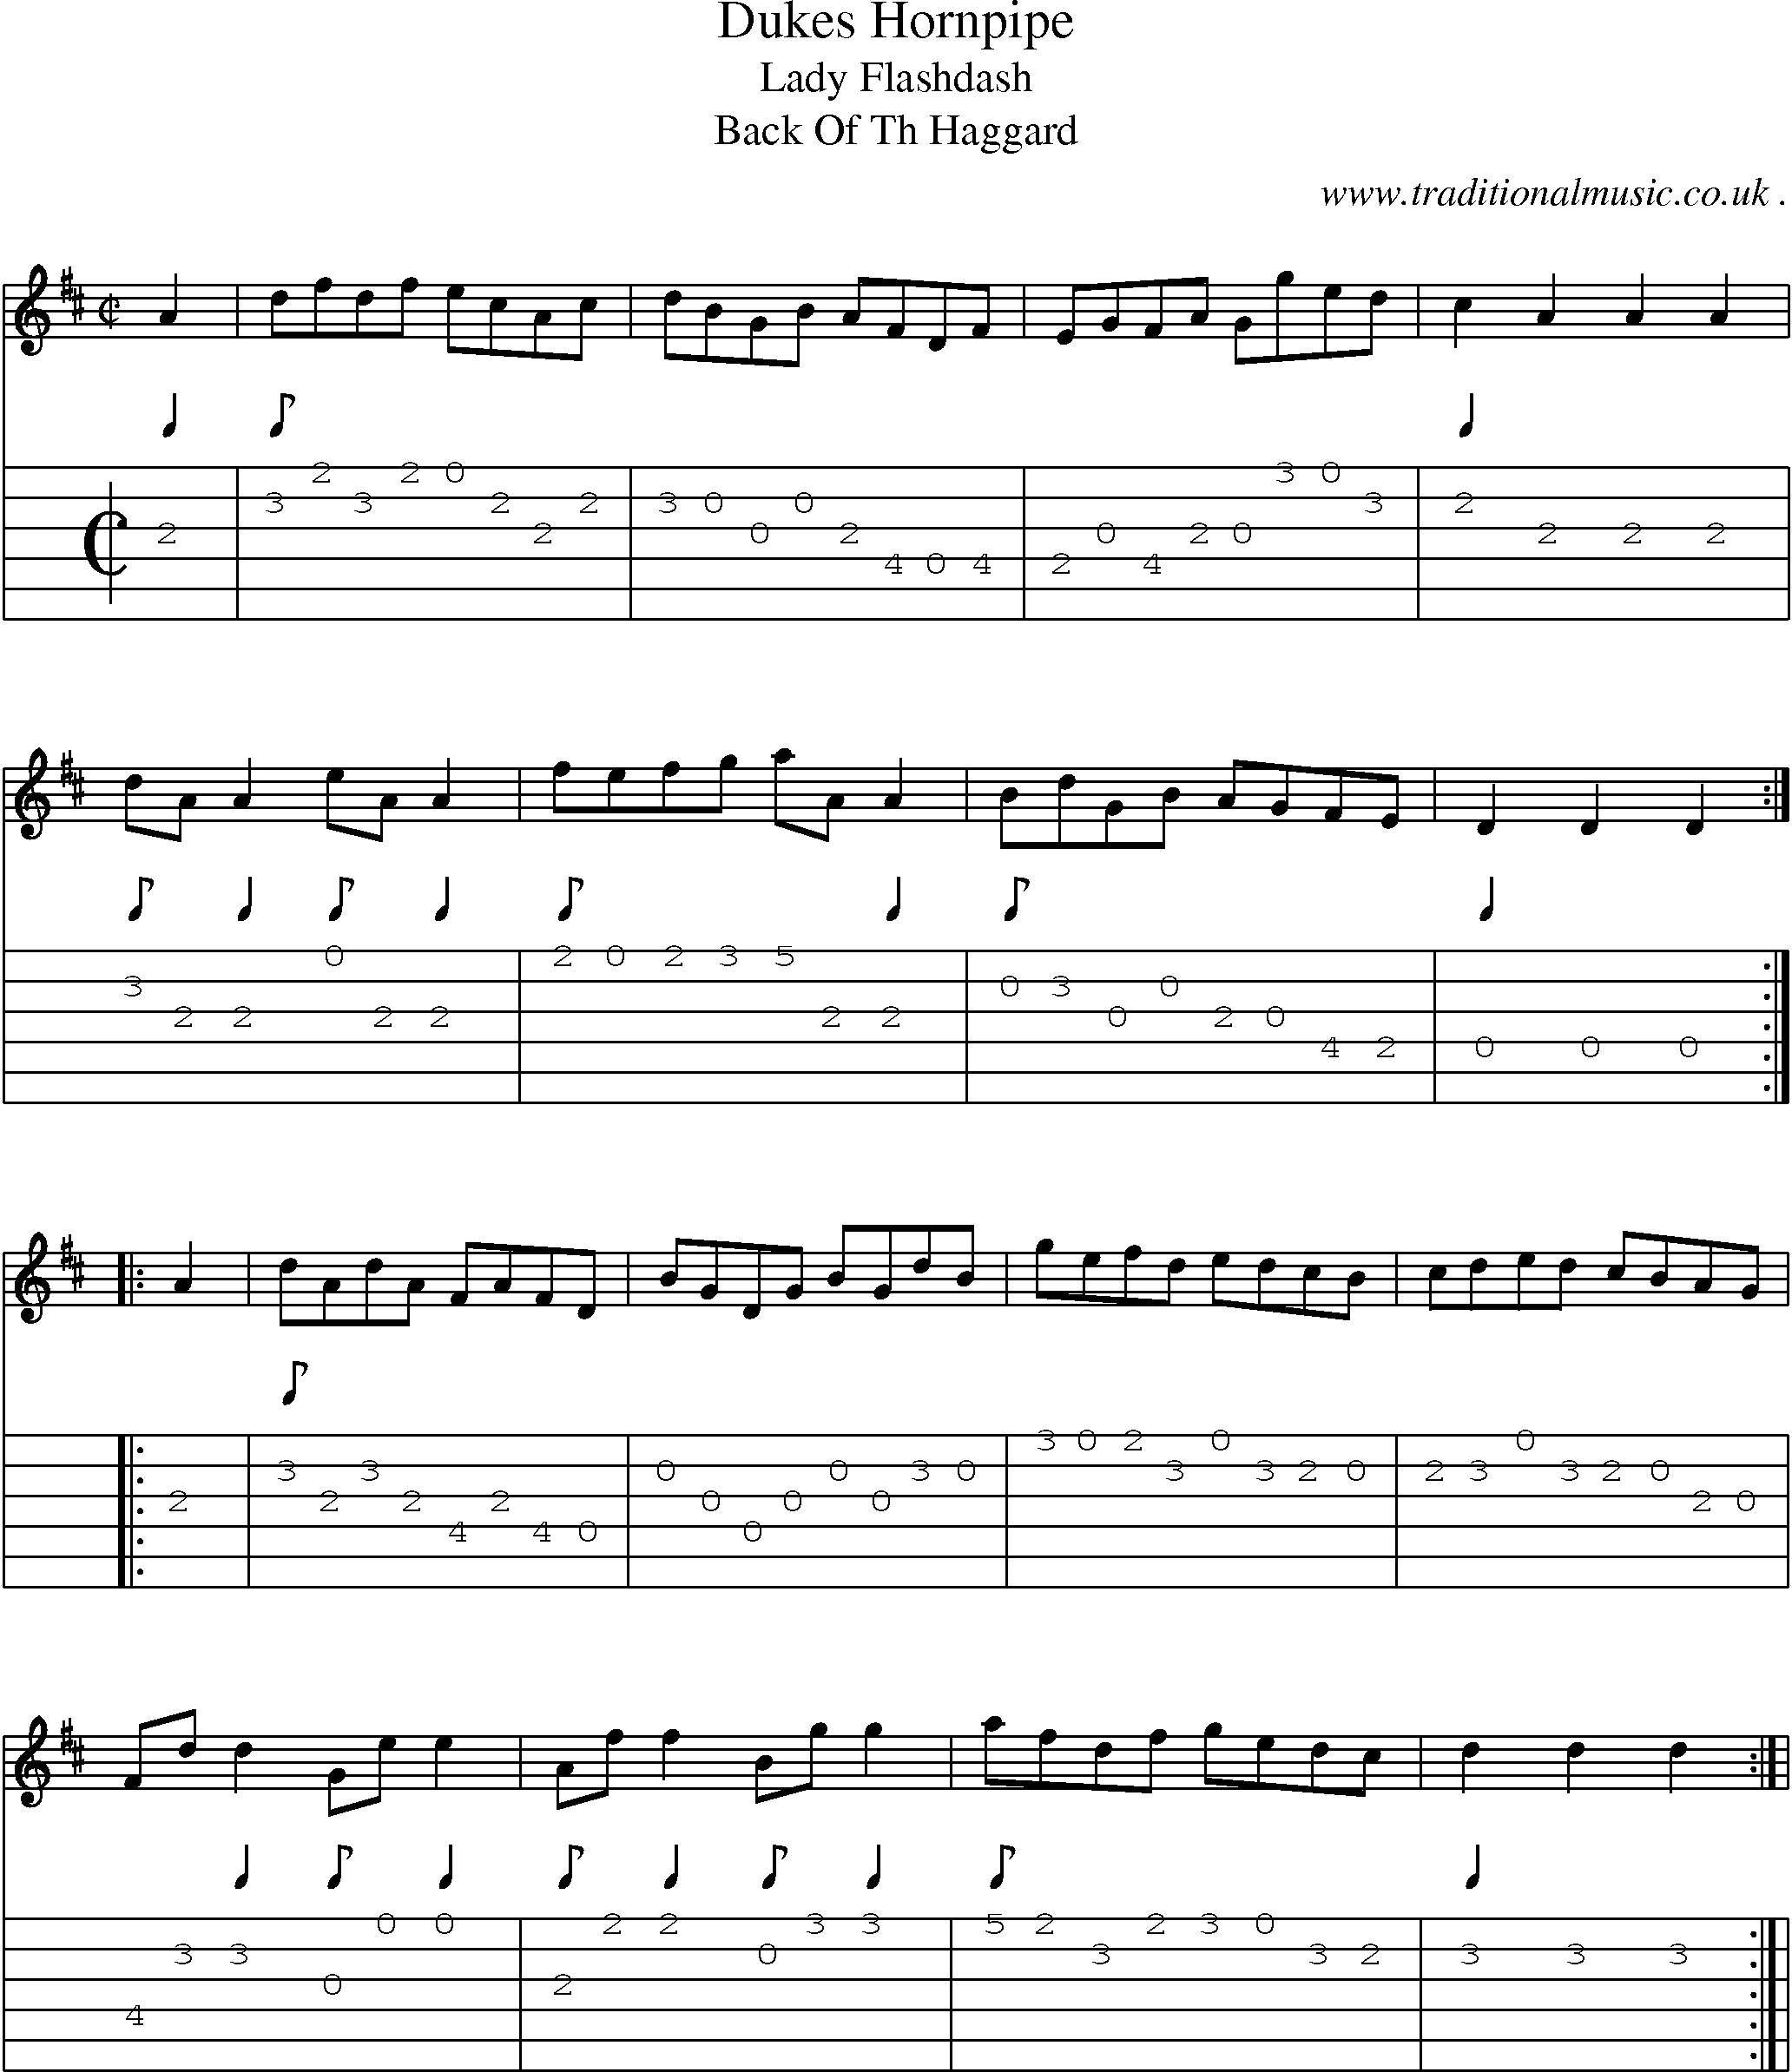 Sheet-Music and Guitar Tabs for Dukes Hornpipe